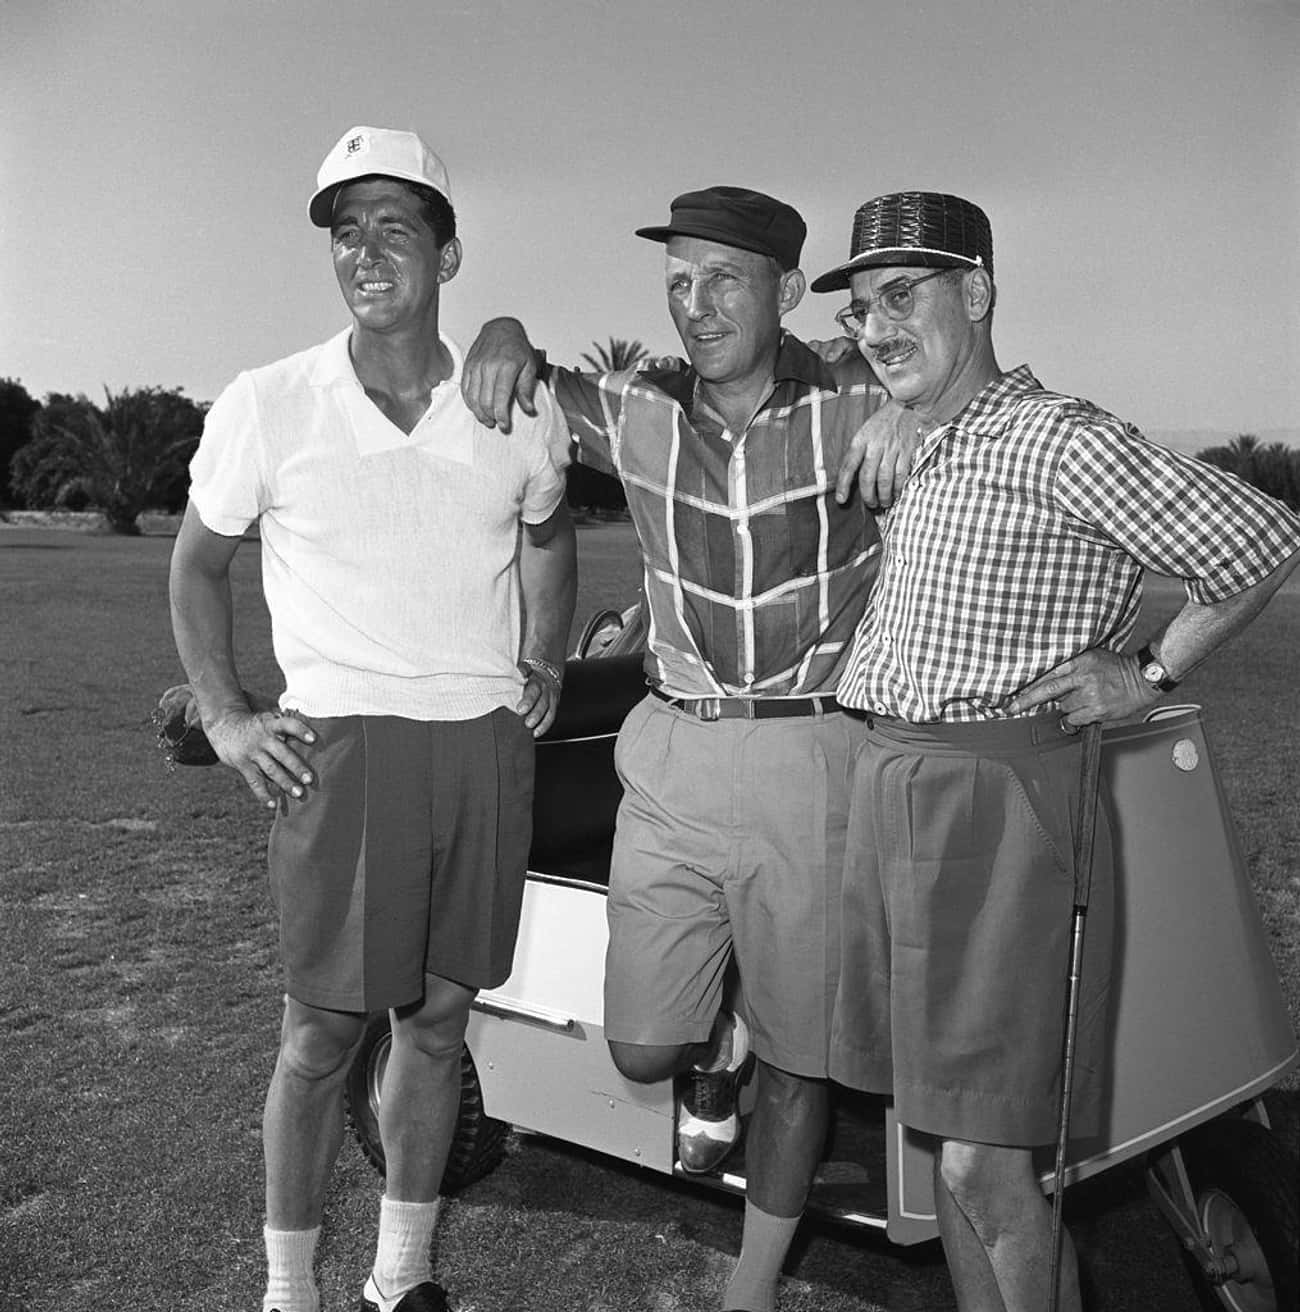 Dean Martin, Bing Crosby, And Groucho Marx On The Golf Course, 1954